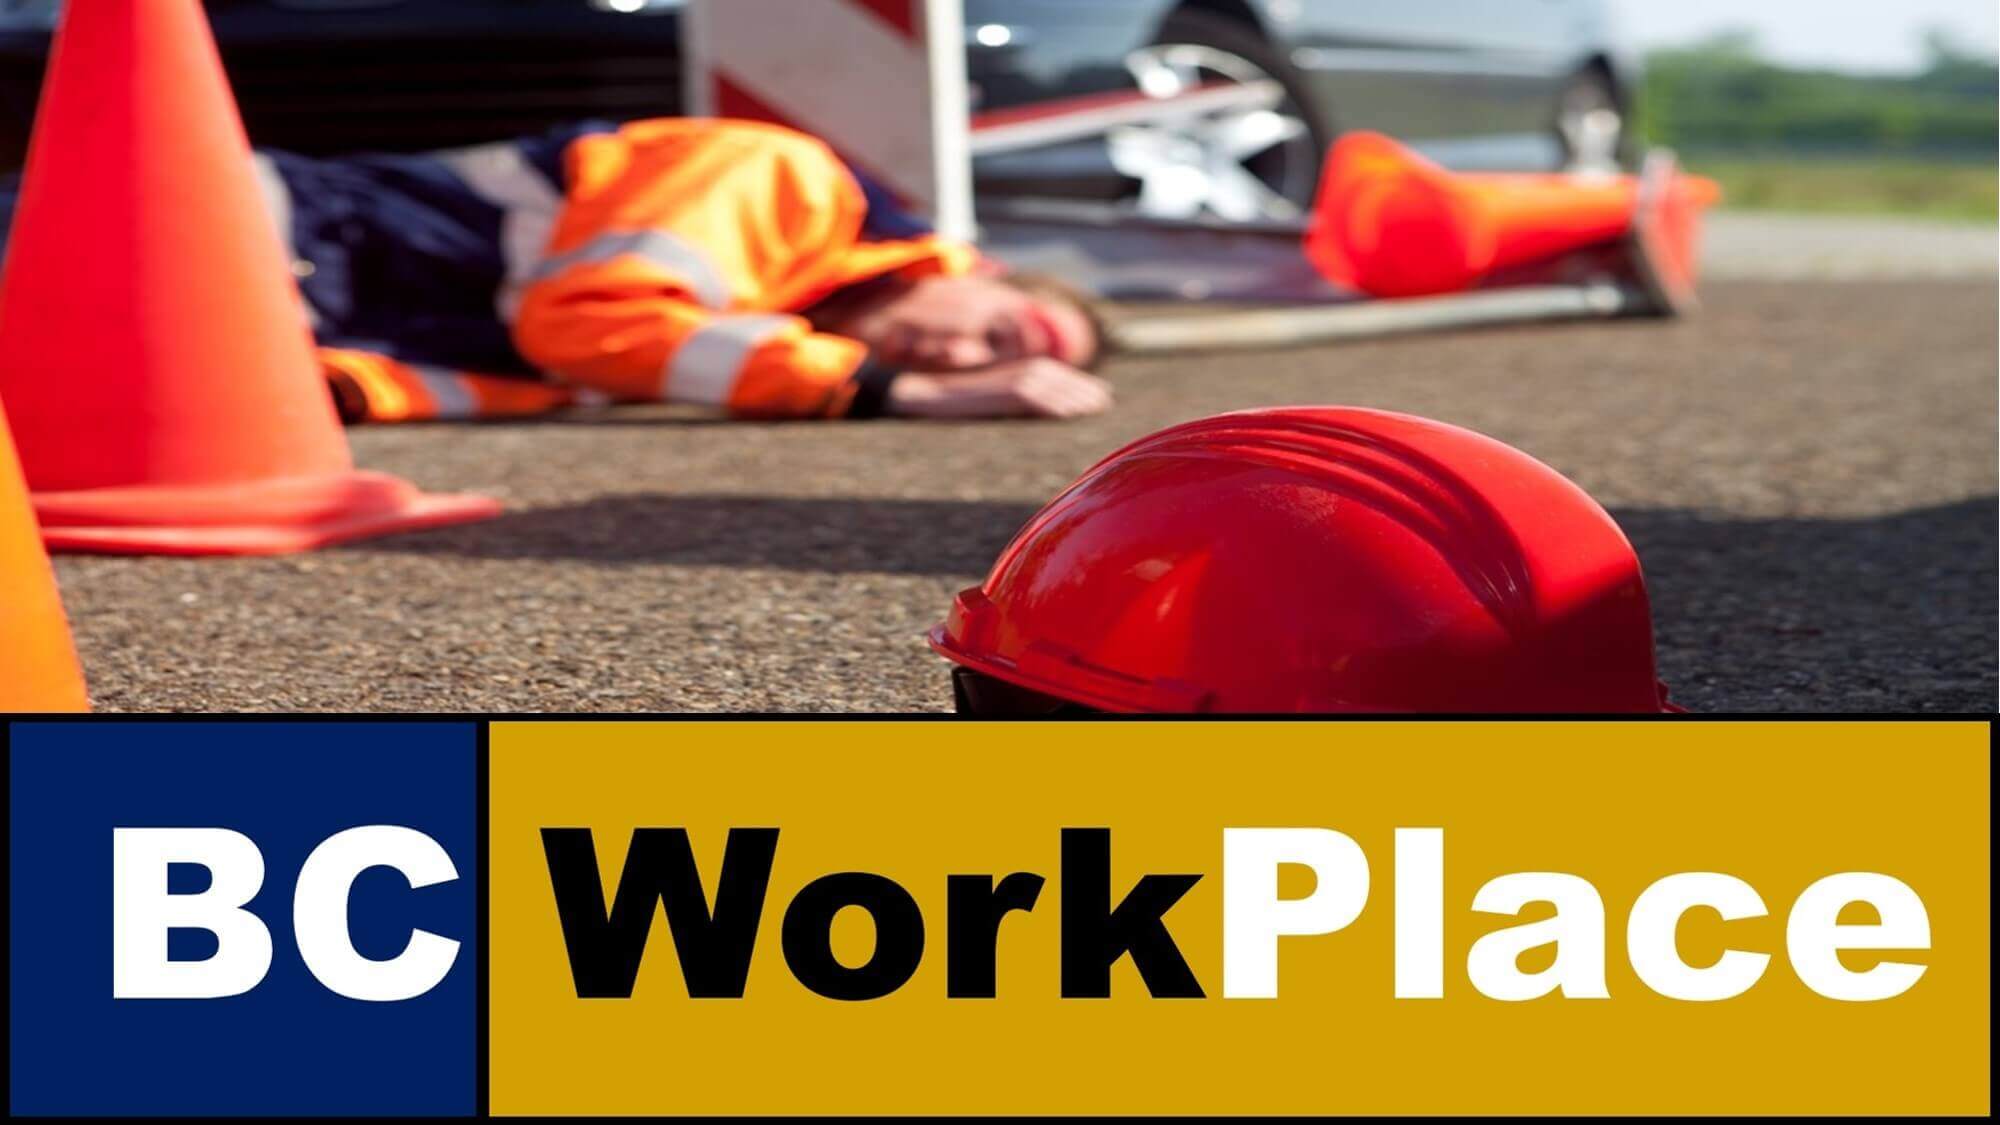 Worksafe First Aid Hazard Ratings